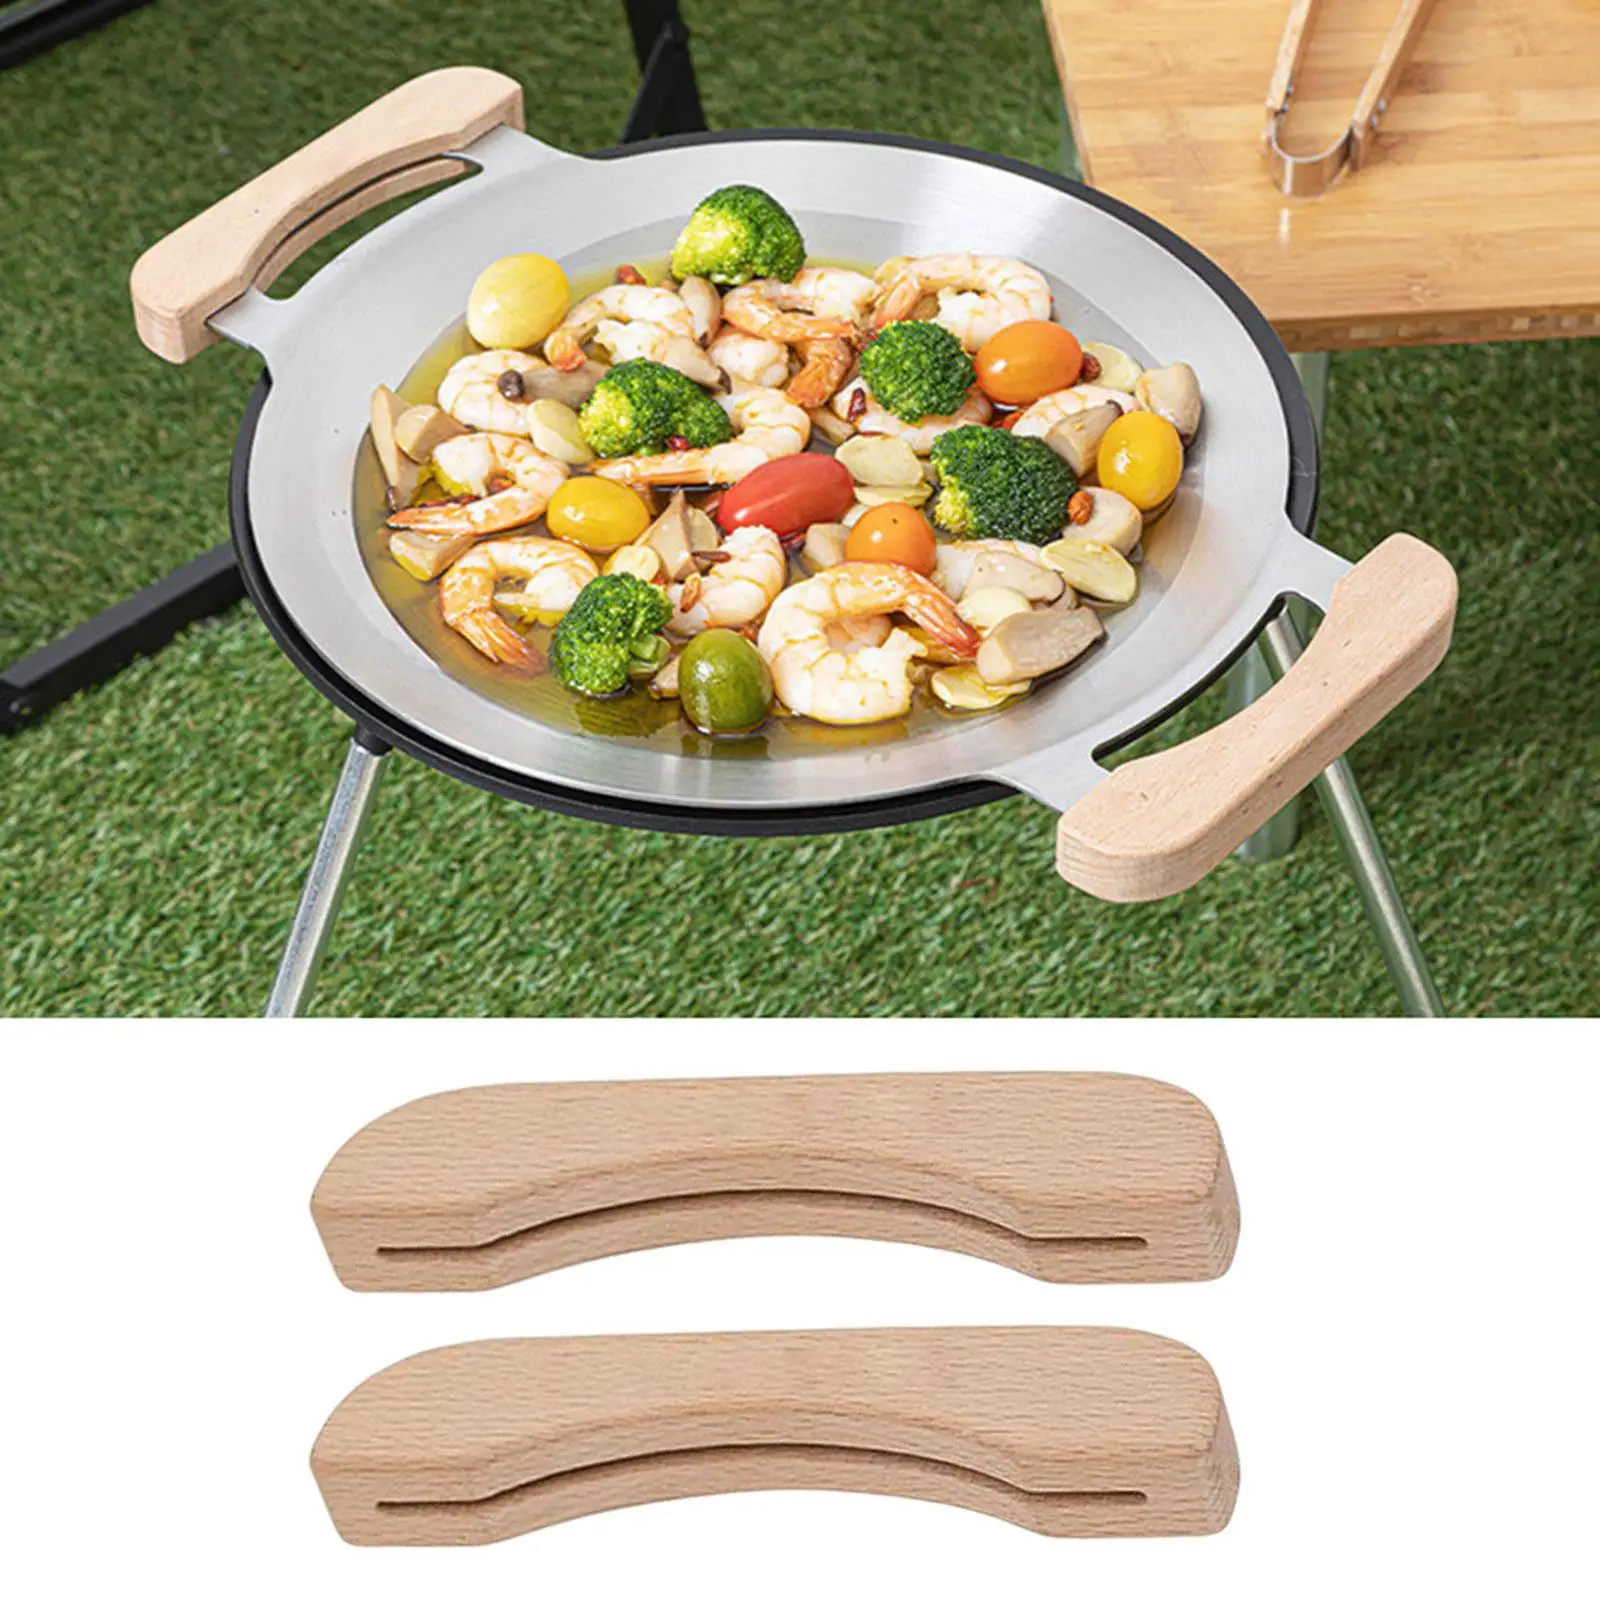 BBQ Barbecue Pan Handle Scald Proof Heat Resistant for Grill Pan Camping